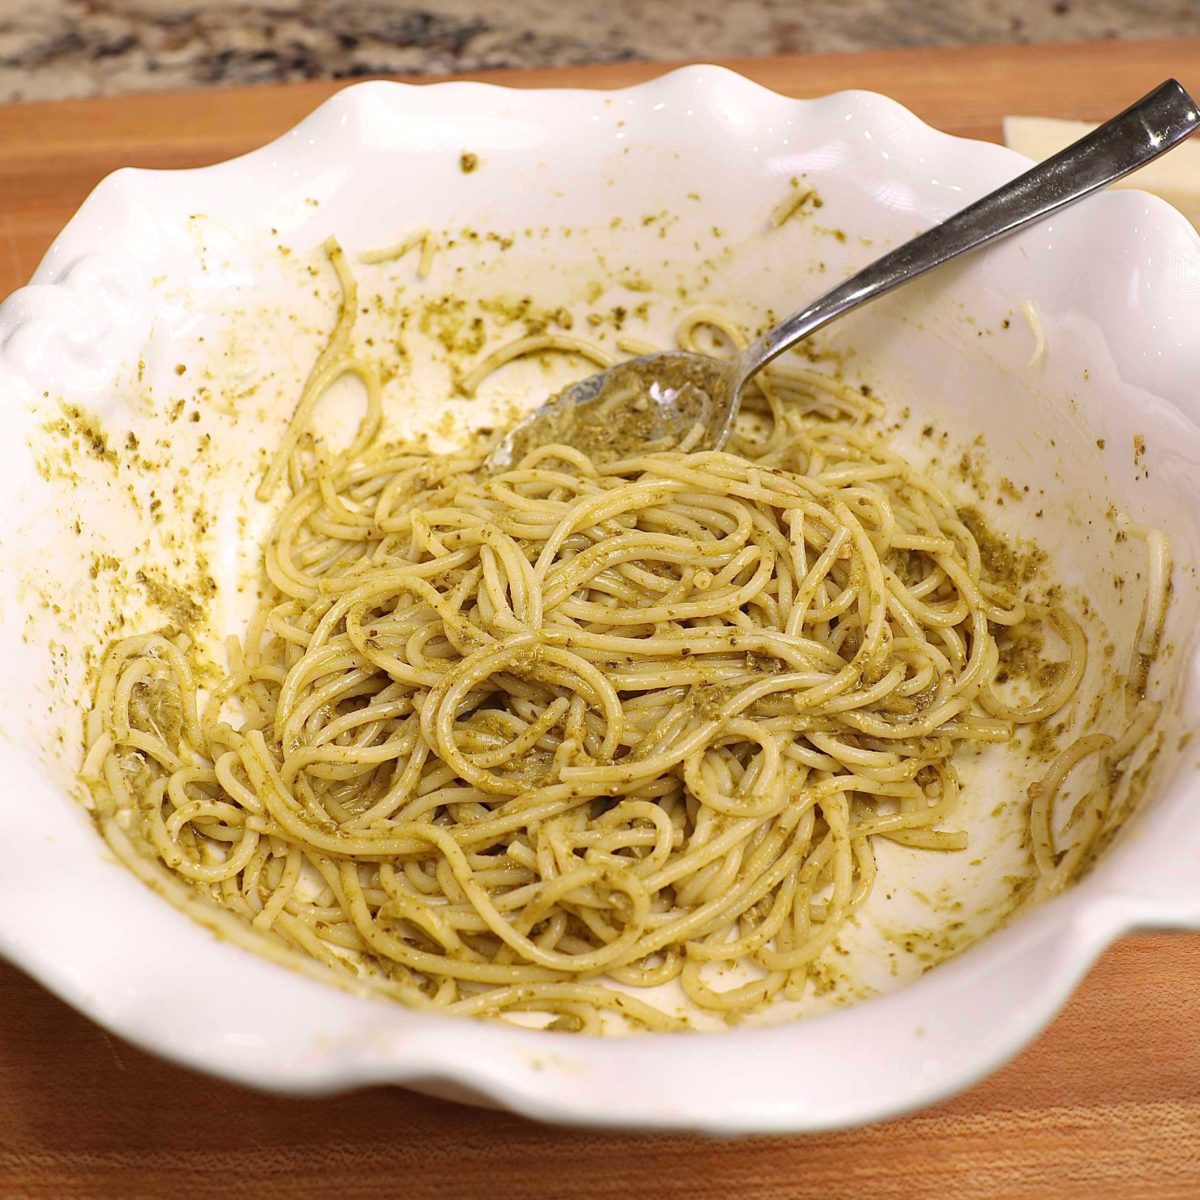 pesto pasta in a large white bowl with a spoon on the side.